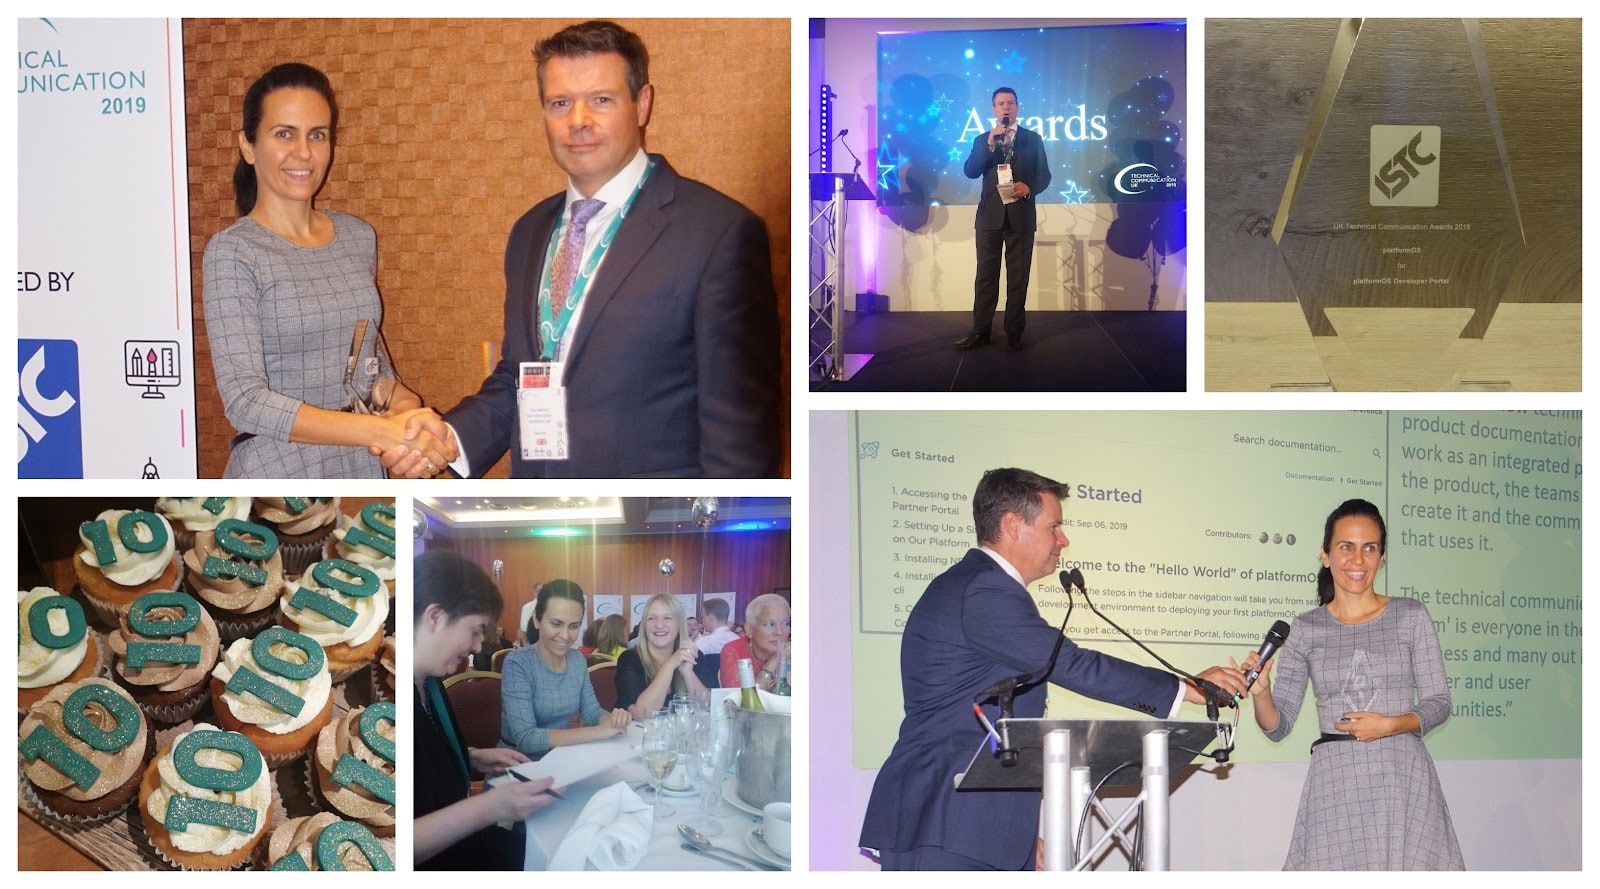 Collage of photos from the Gala Dinner and Award Acceptance Ceremony